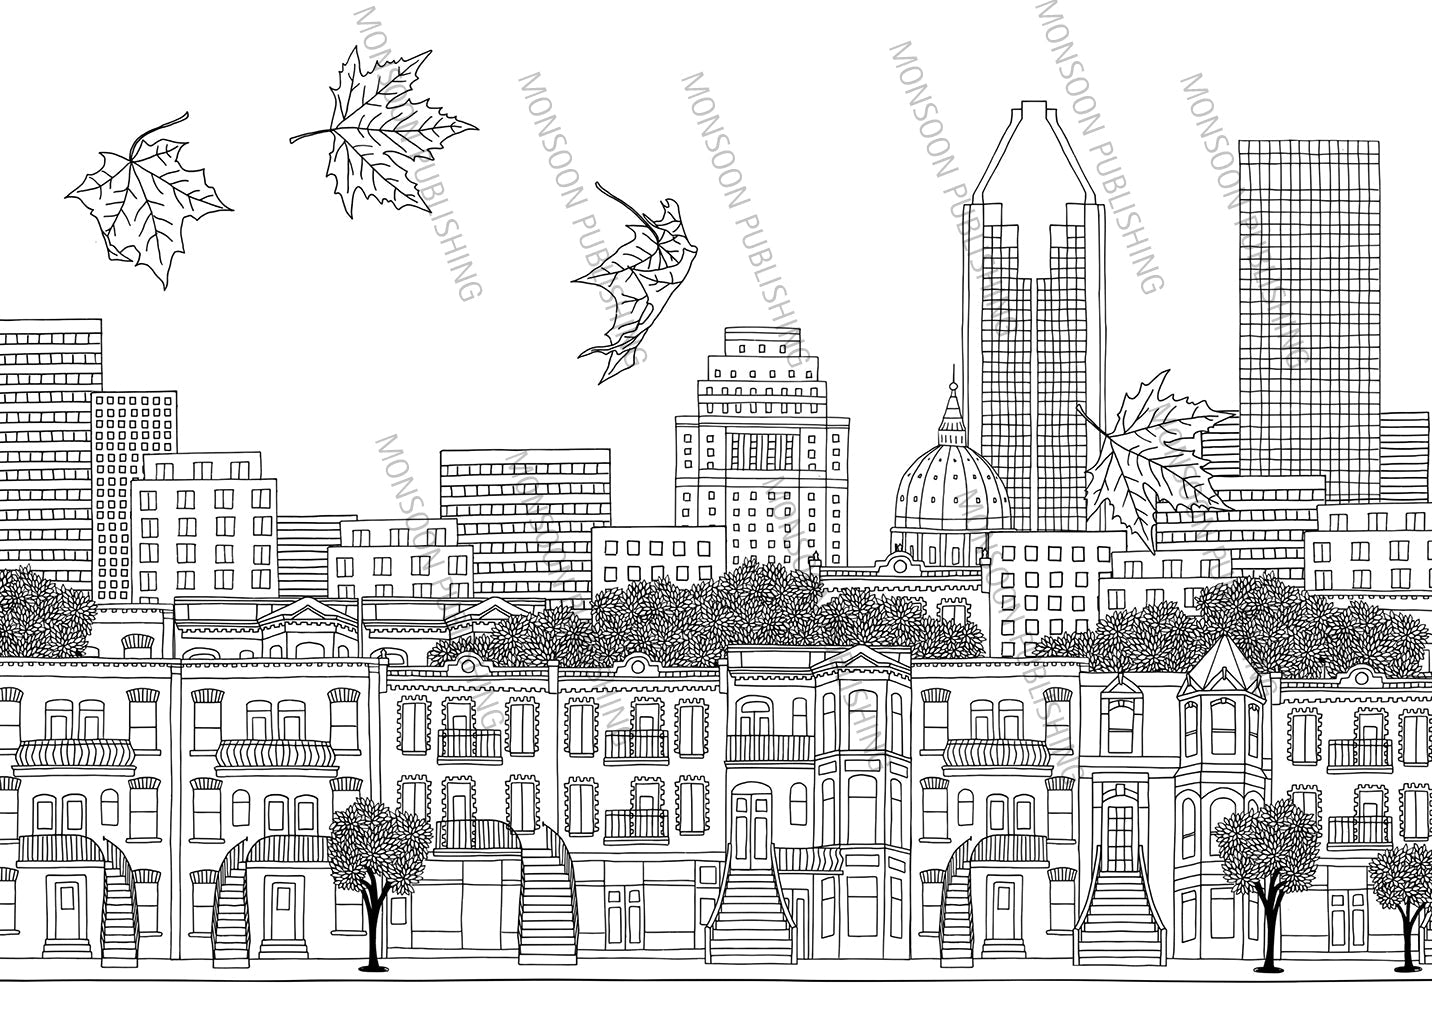 Cities of the World Coloring Book (Digital) - Monsoon Publishing USA